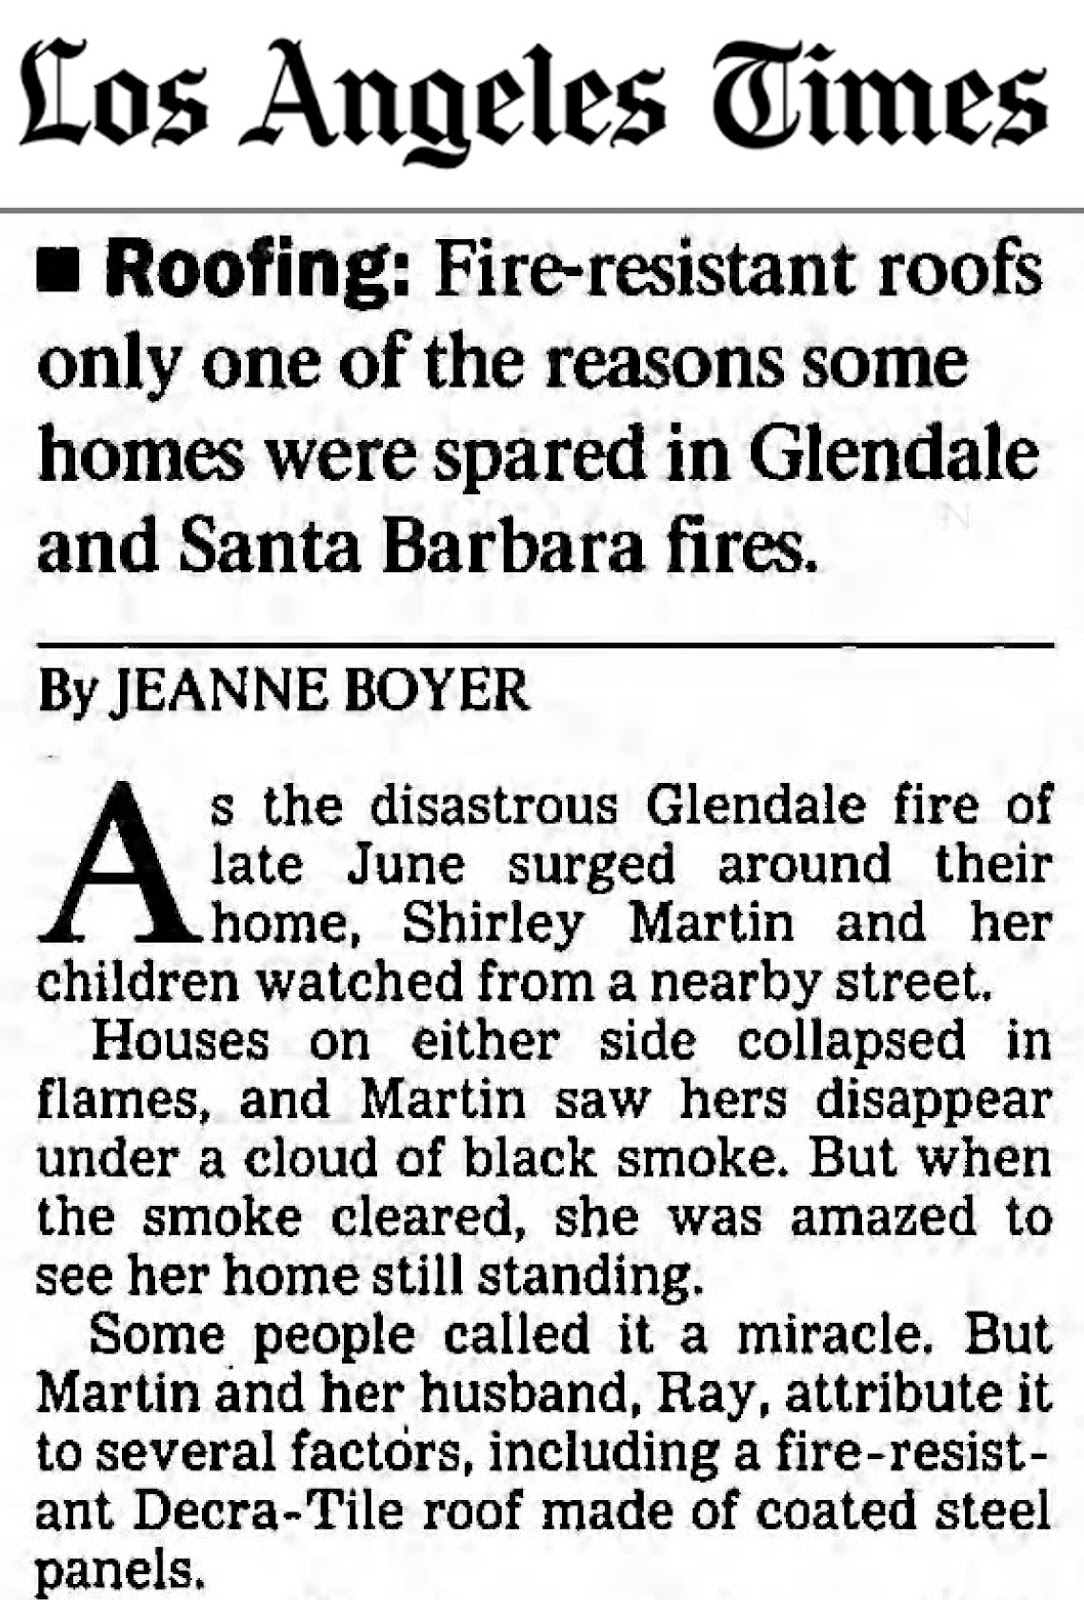 Los Angeles Times article about how a metal roof saved a home from fire